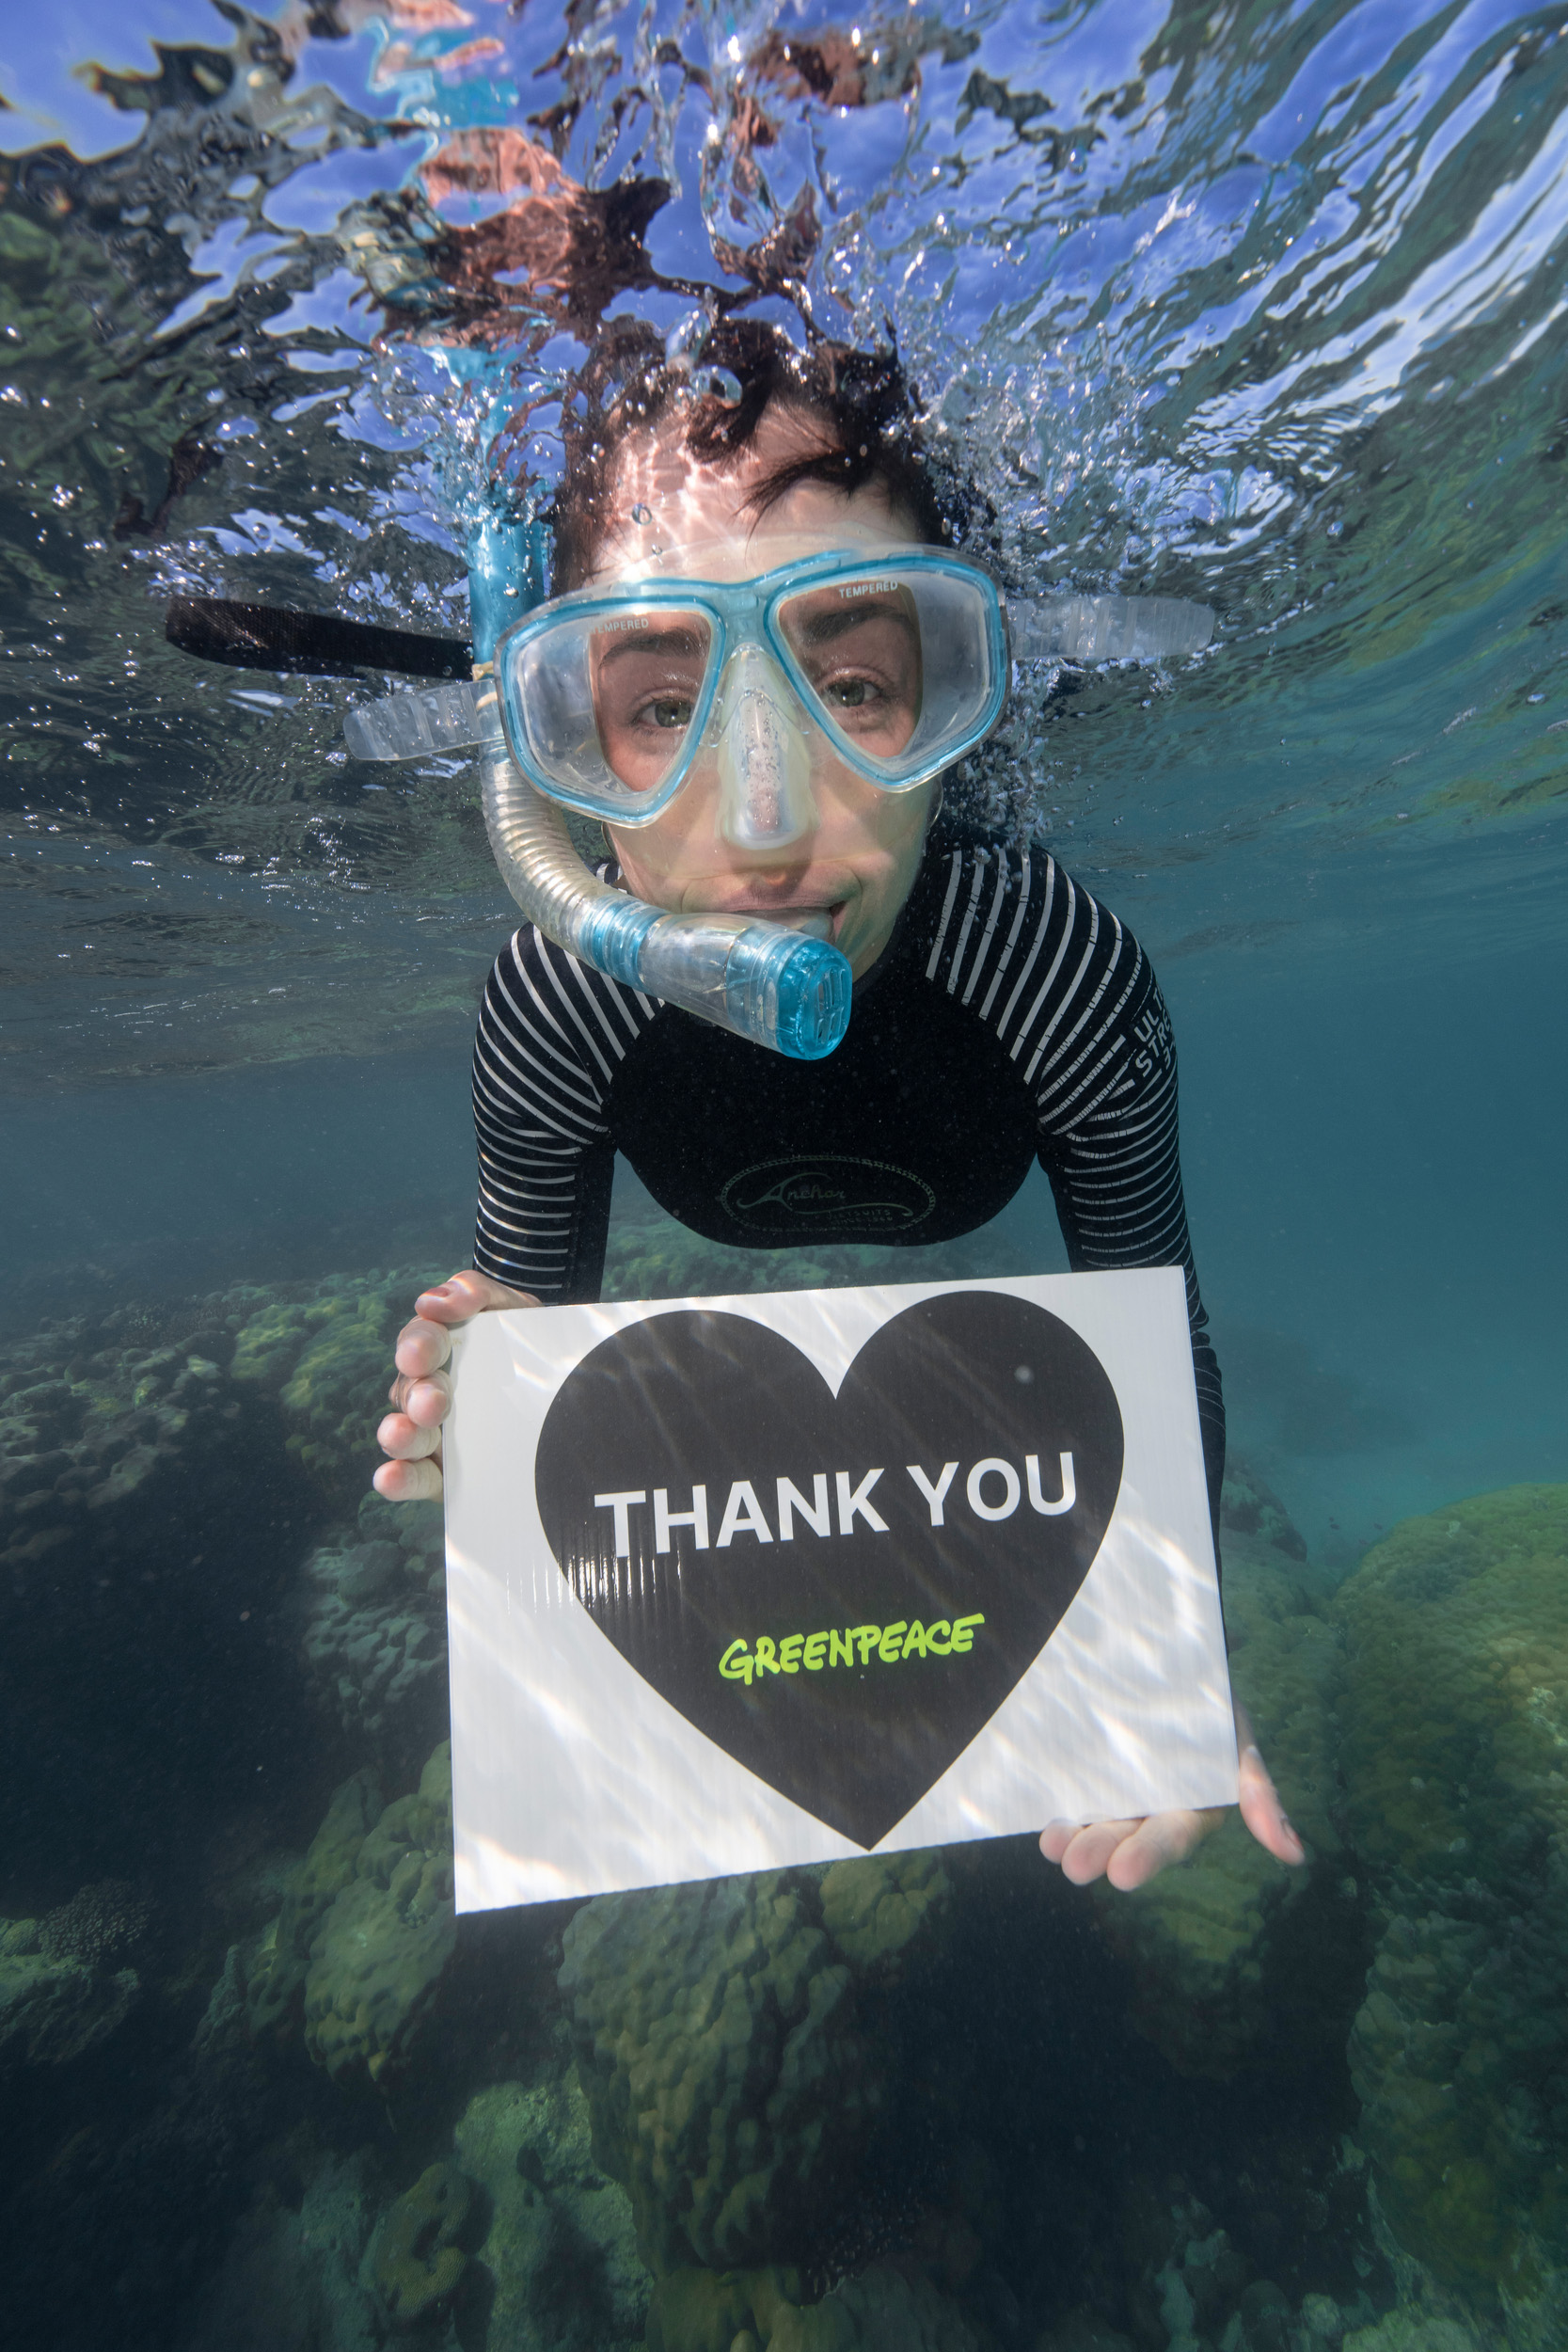 Greenpeace campaigner swims underwater with a snorkel and a sign that says “Thank you” in a heart.